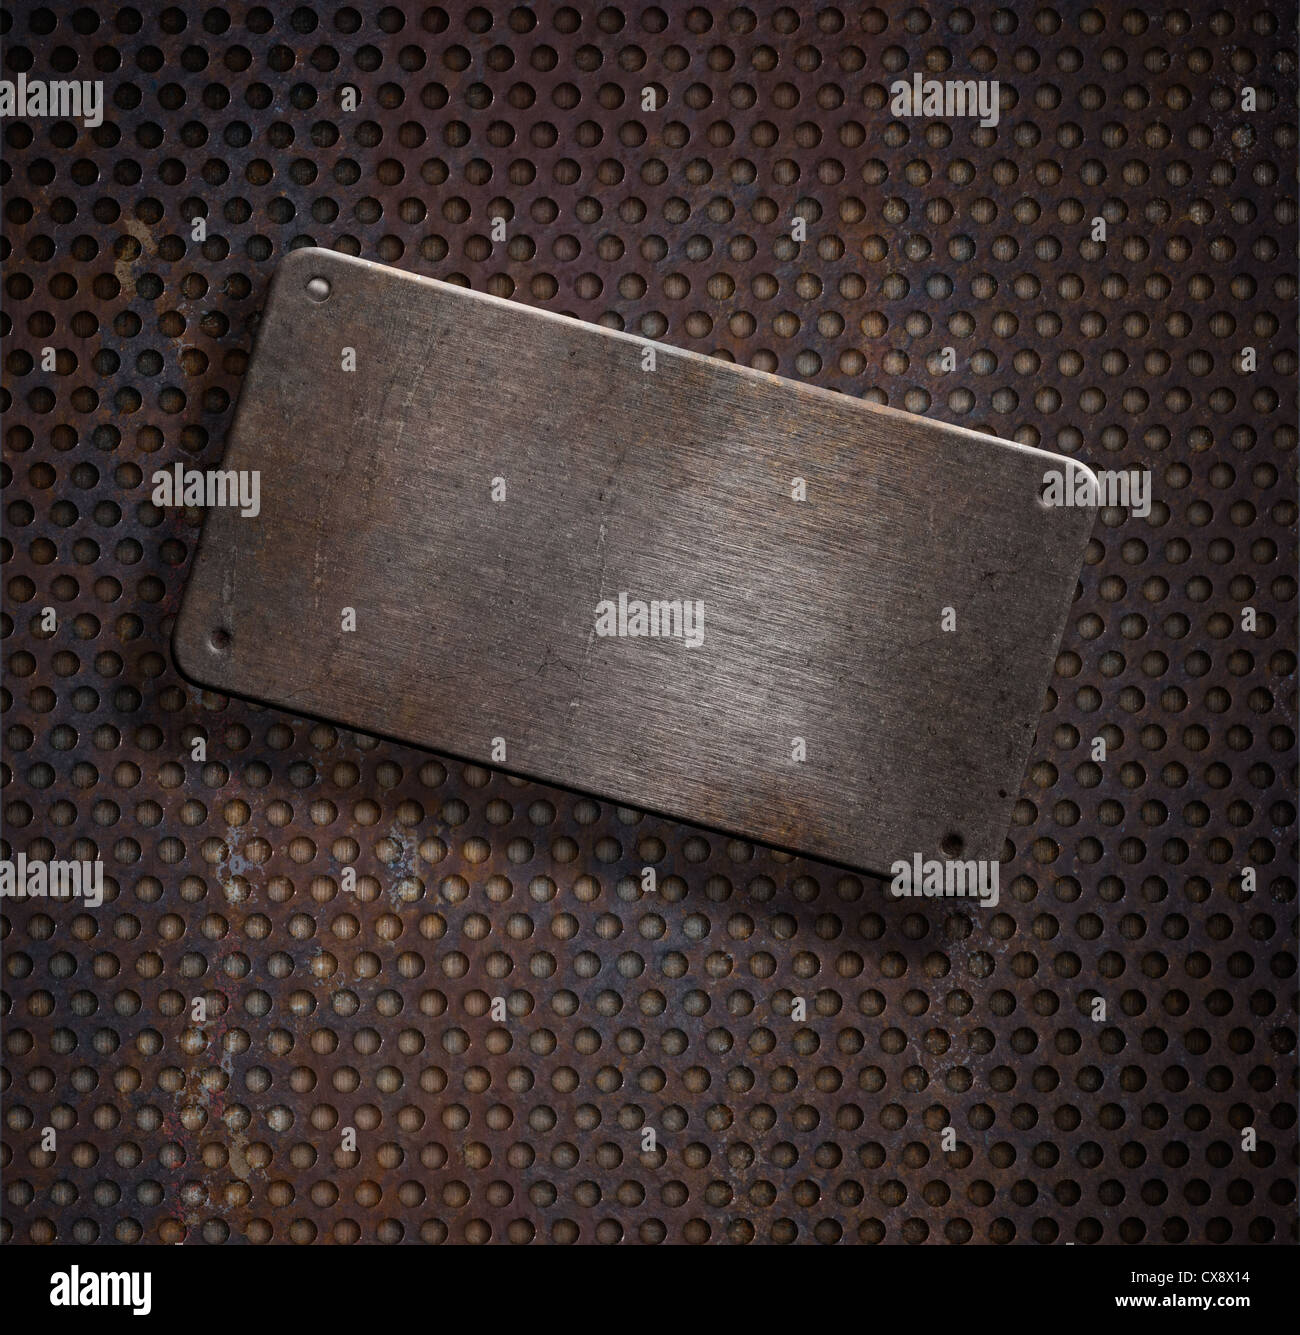 grunge rusty metal plate over grid background Stock Photo